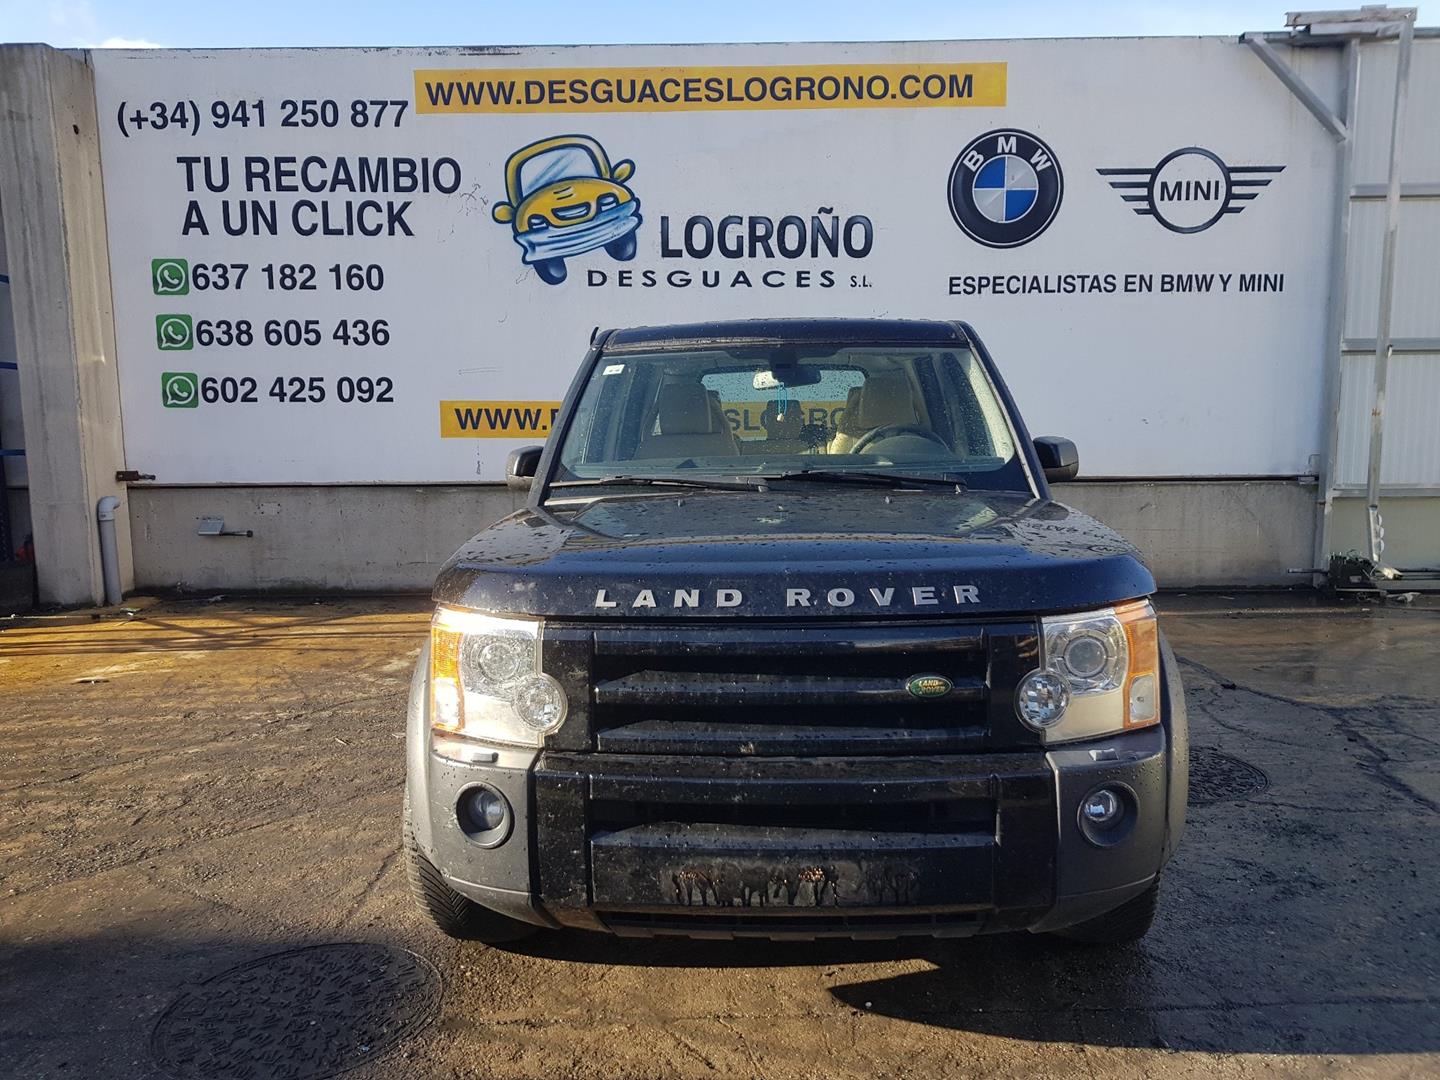 LAND ROVER Discovery 4 generation (2009-2016) Variklio blokas BLOQUE276DT, 276DT, 1111AA 22963236